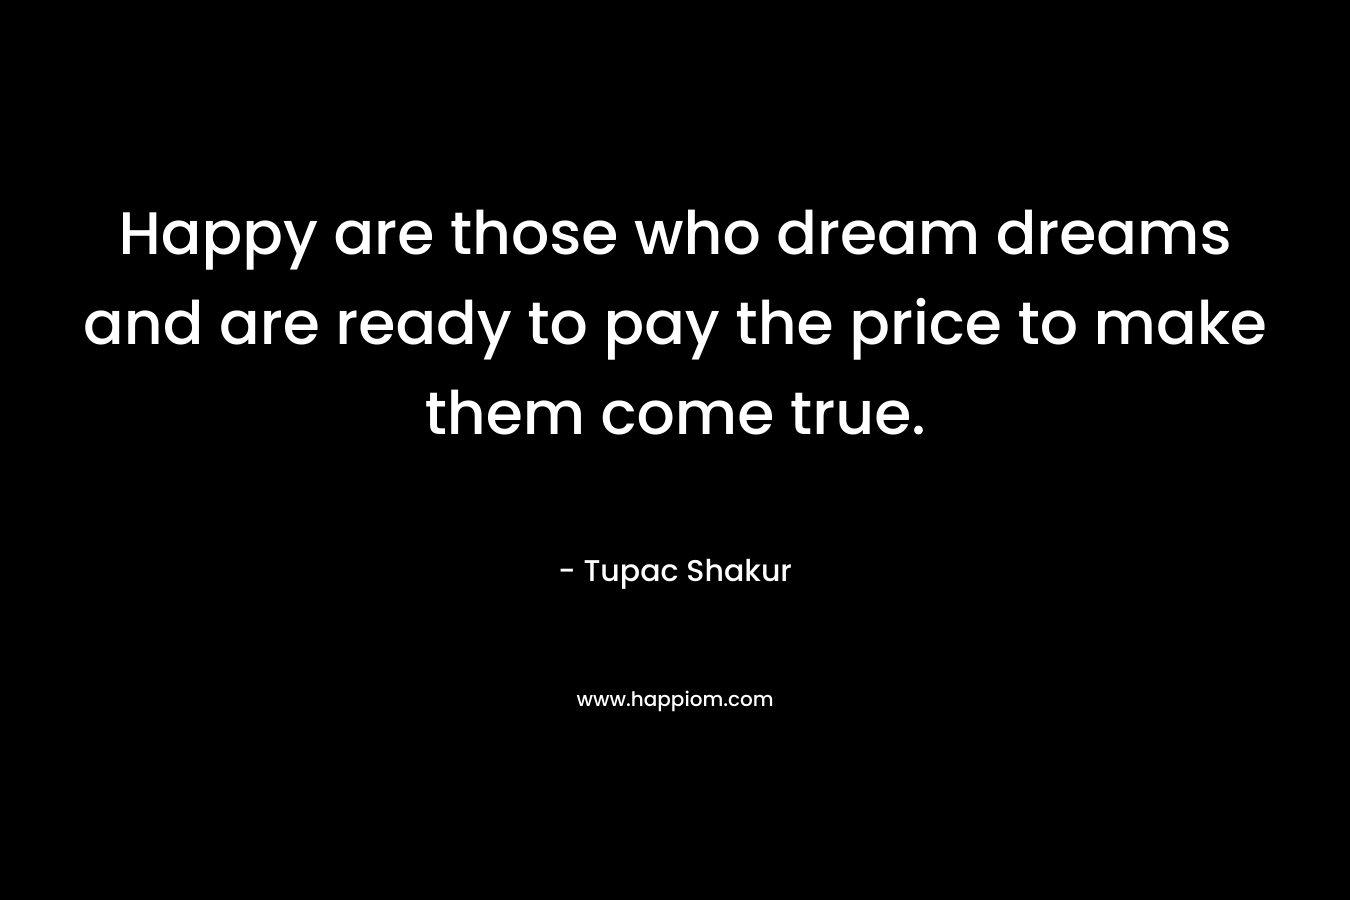 Happy are those who dream dreams and are ready to pay the price to make them come true.